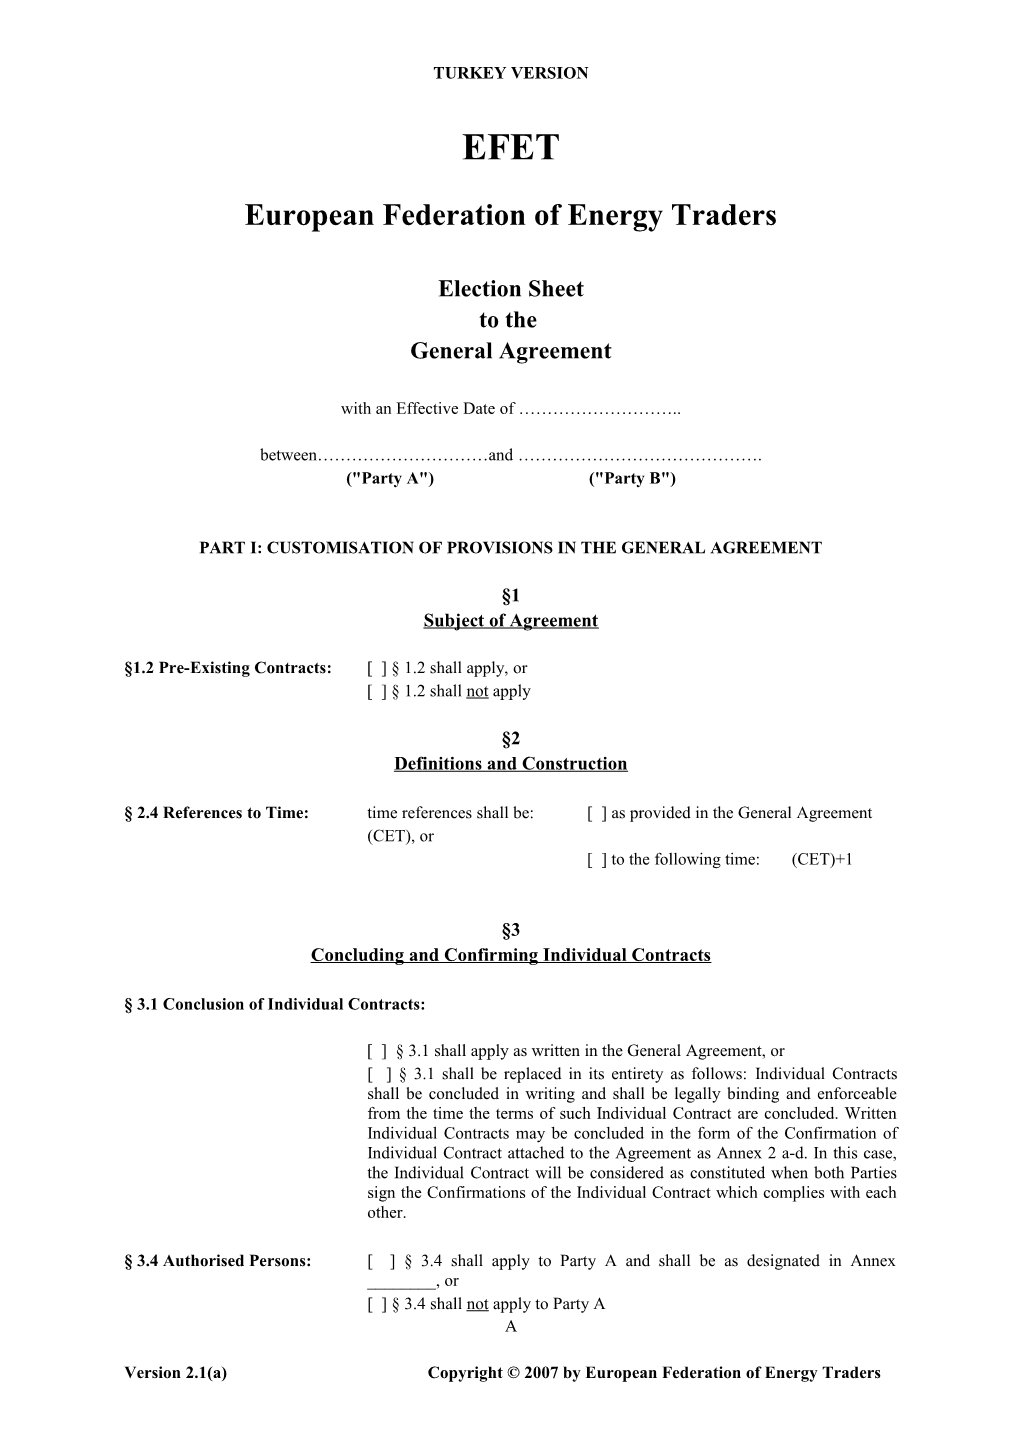 European Federation of Energy Traders